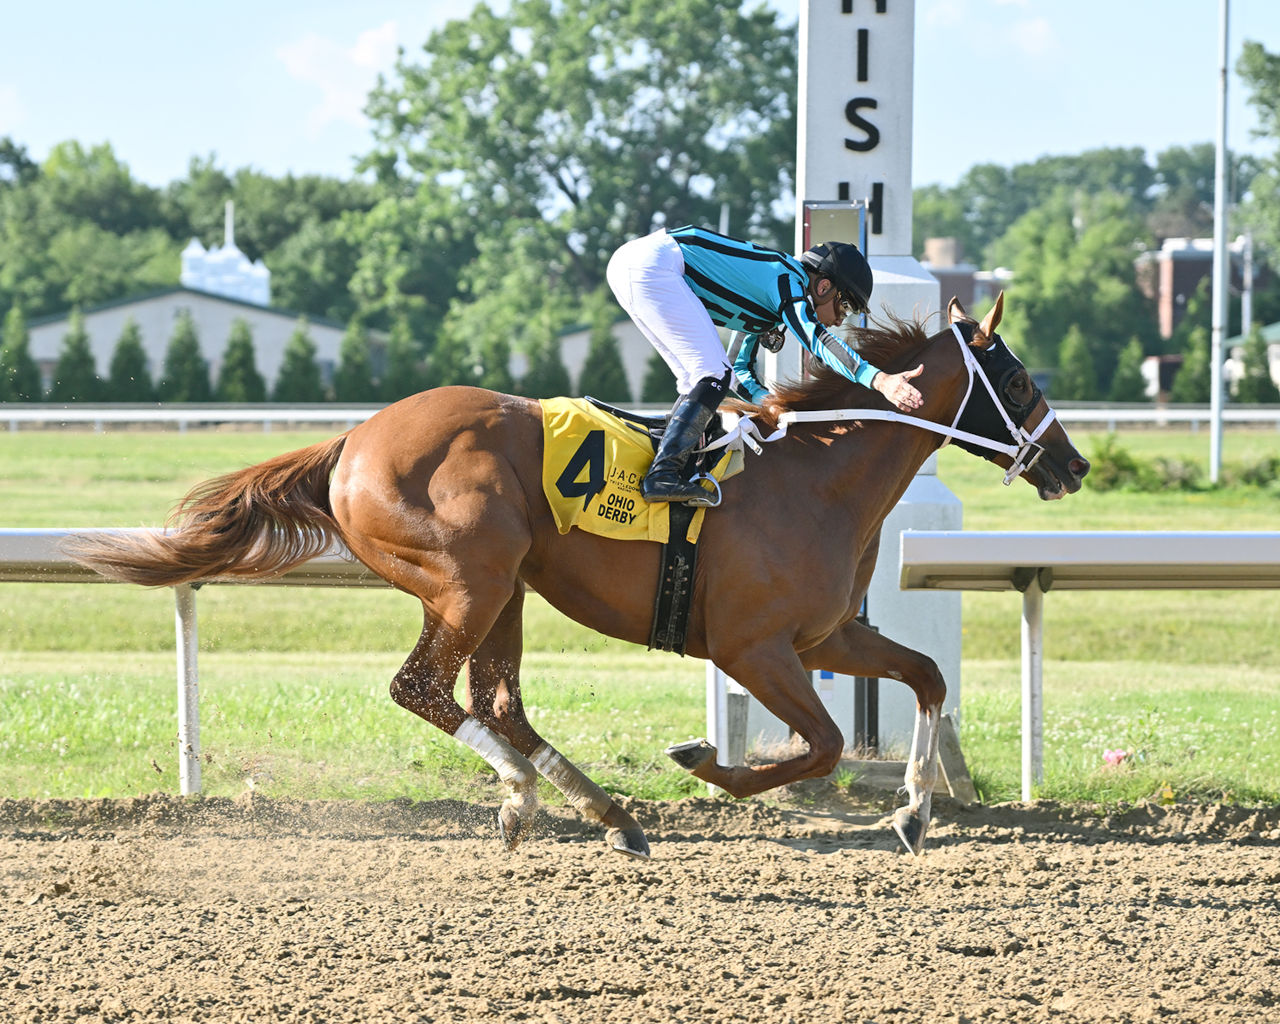 Two Phil’s romps in Ohio Derby